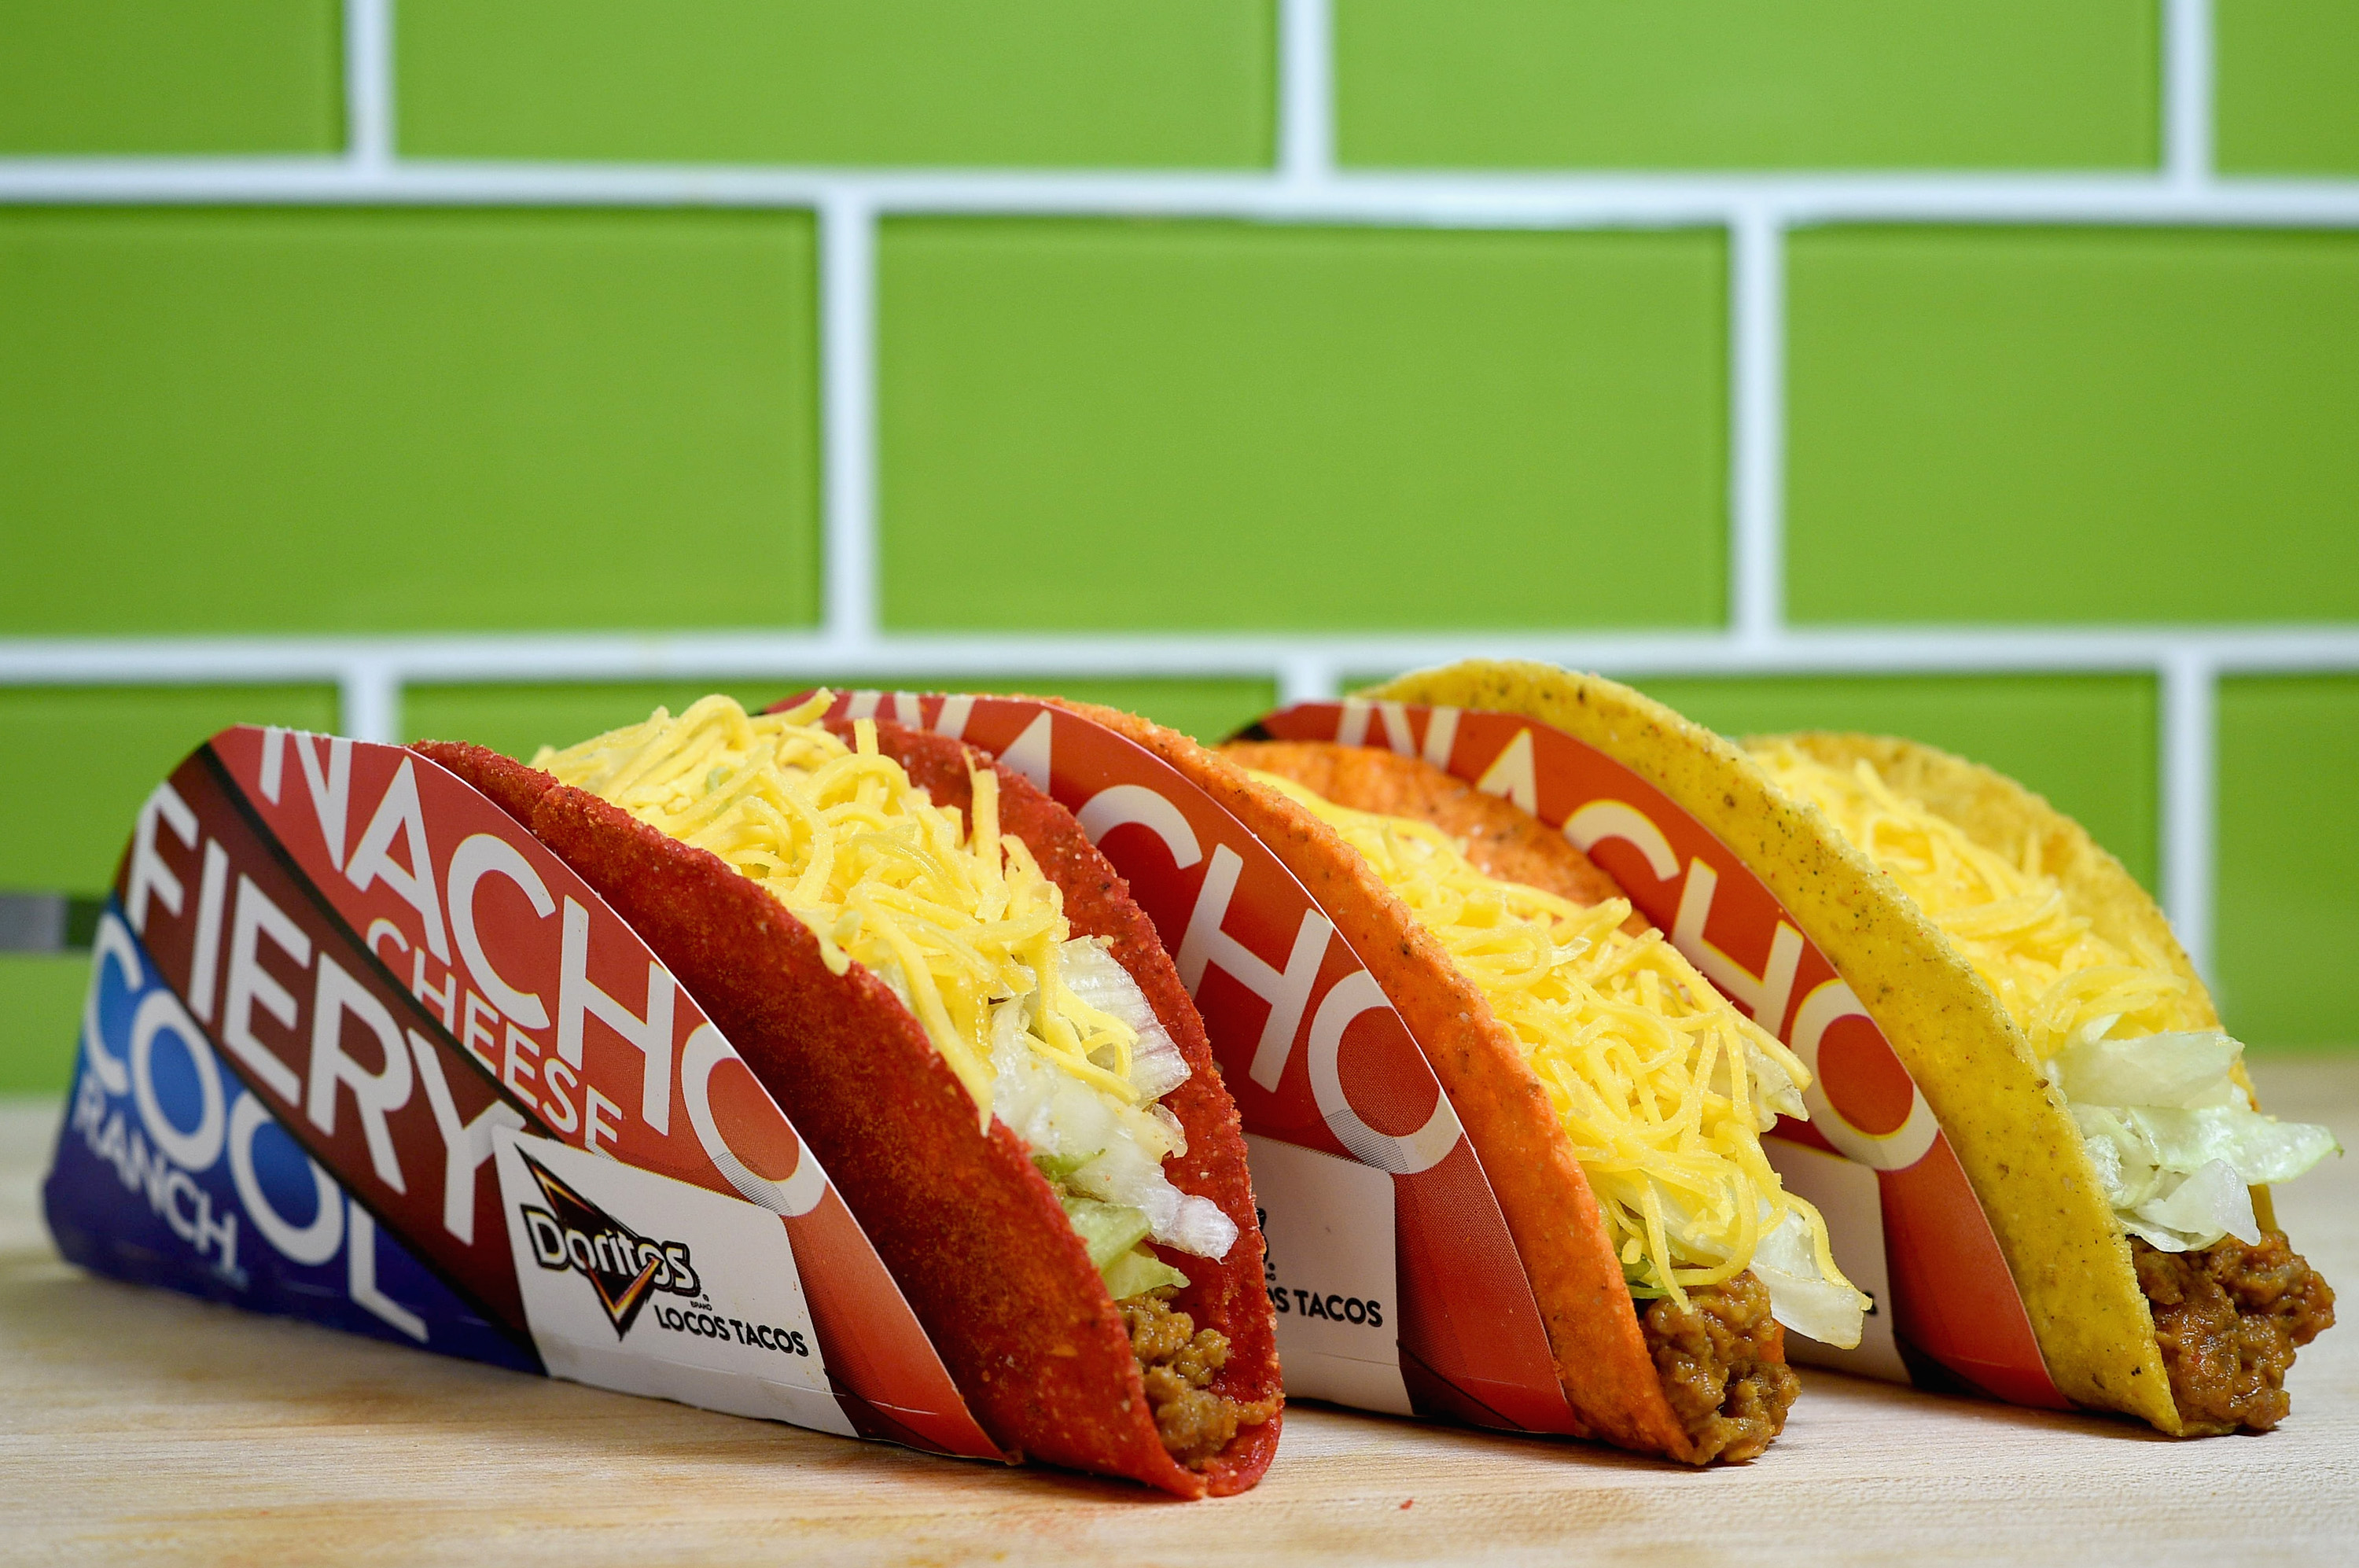 Three Taco Bell Doritos Locos Tacos in front of a green tile wall